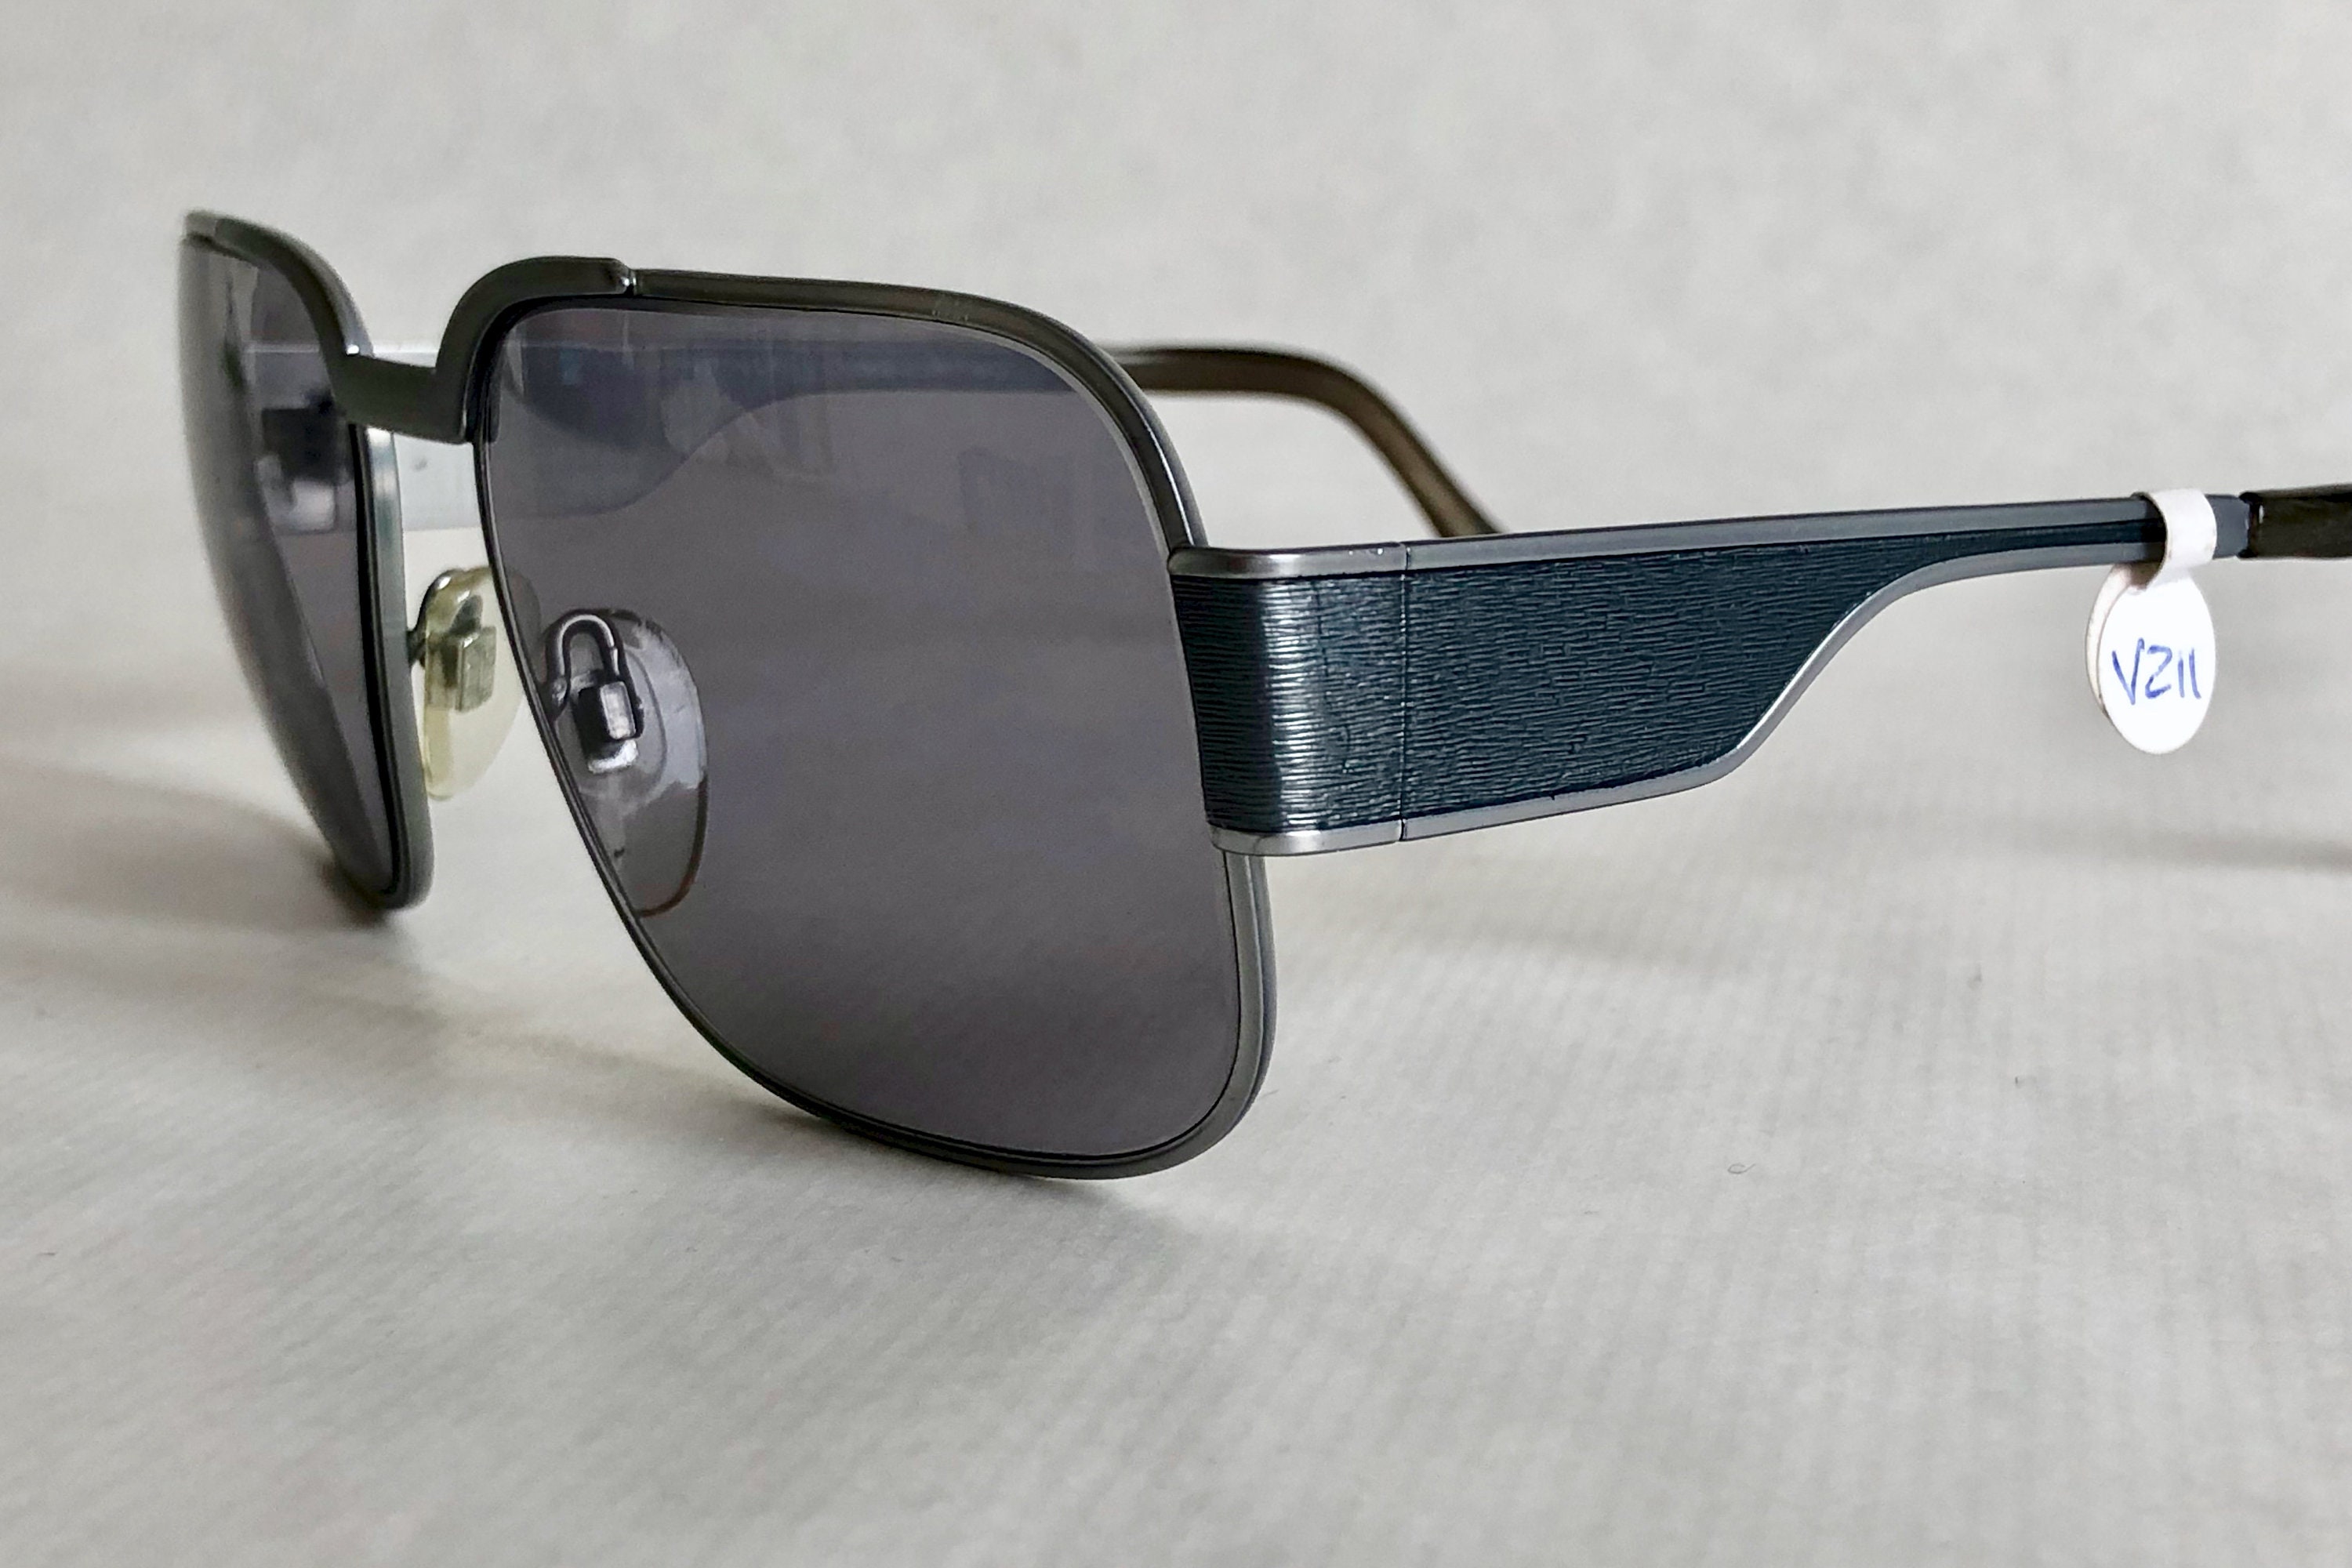 Neostyle Nautic 2 Vintage Sunglasses - New Unworn Deadstock from the 1970s